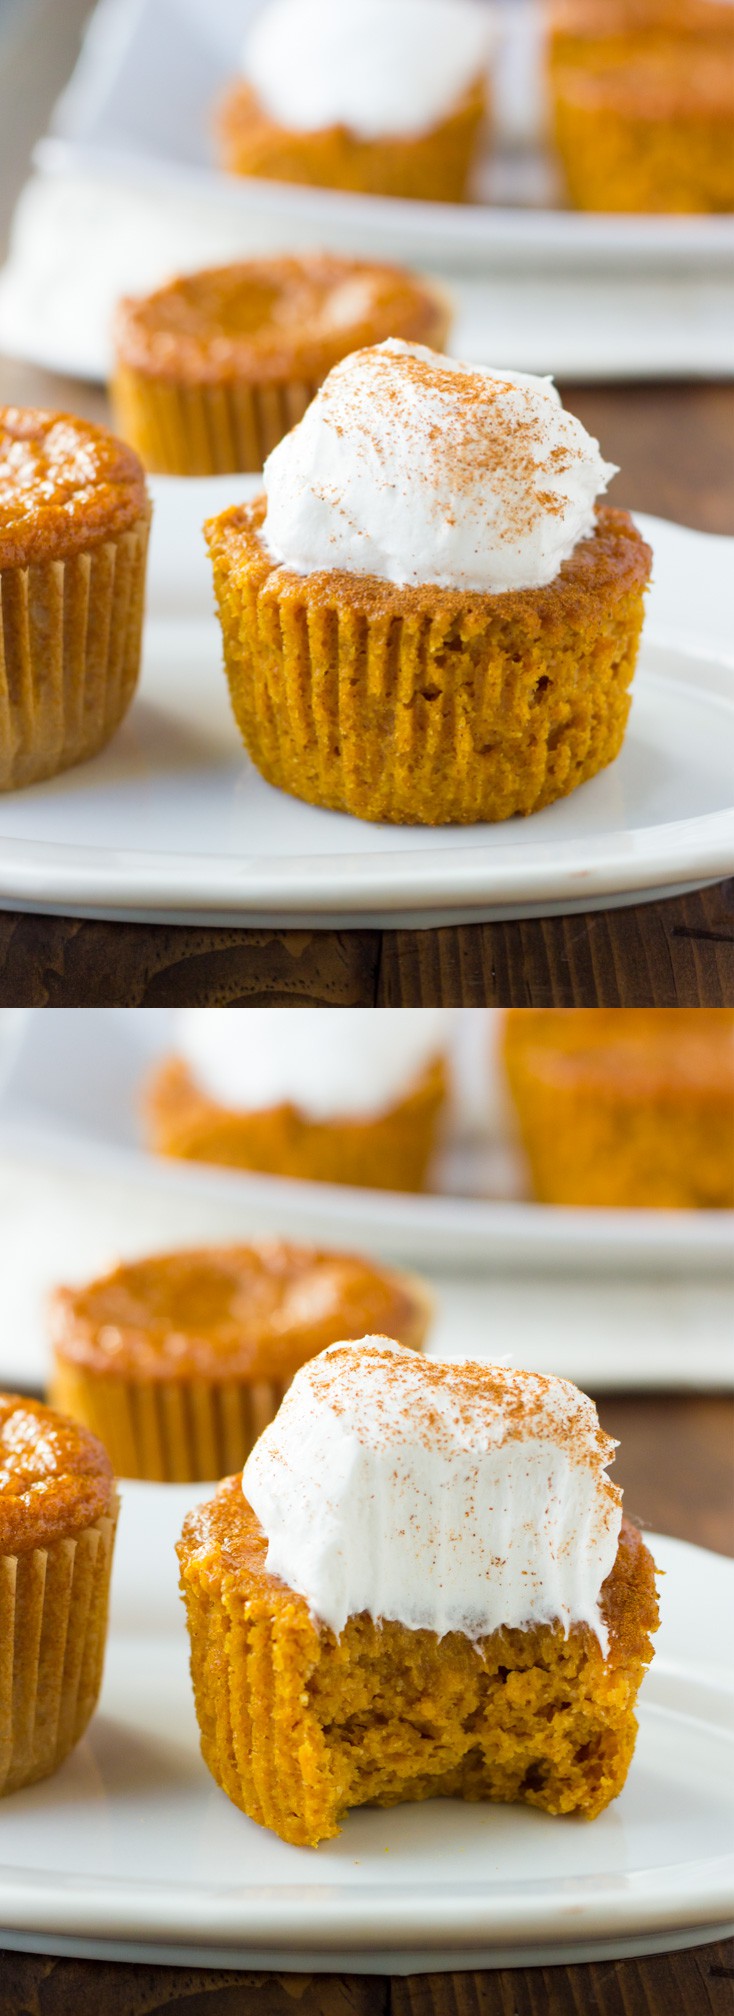 Gluten-Free Crustless Pumpkin Pie Cupcakes! So easy to make and perfect for Thanksgiving. (Dairy-Free)